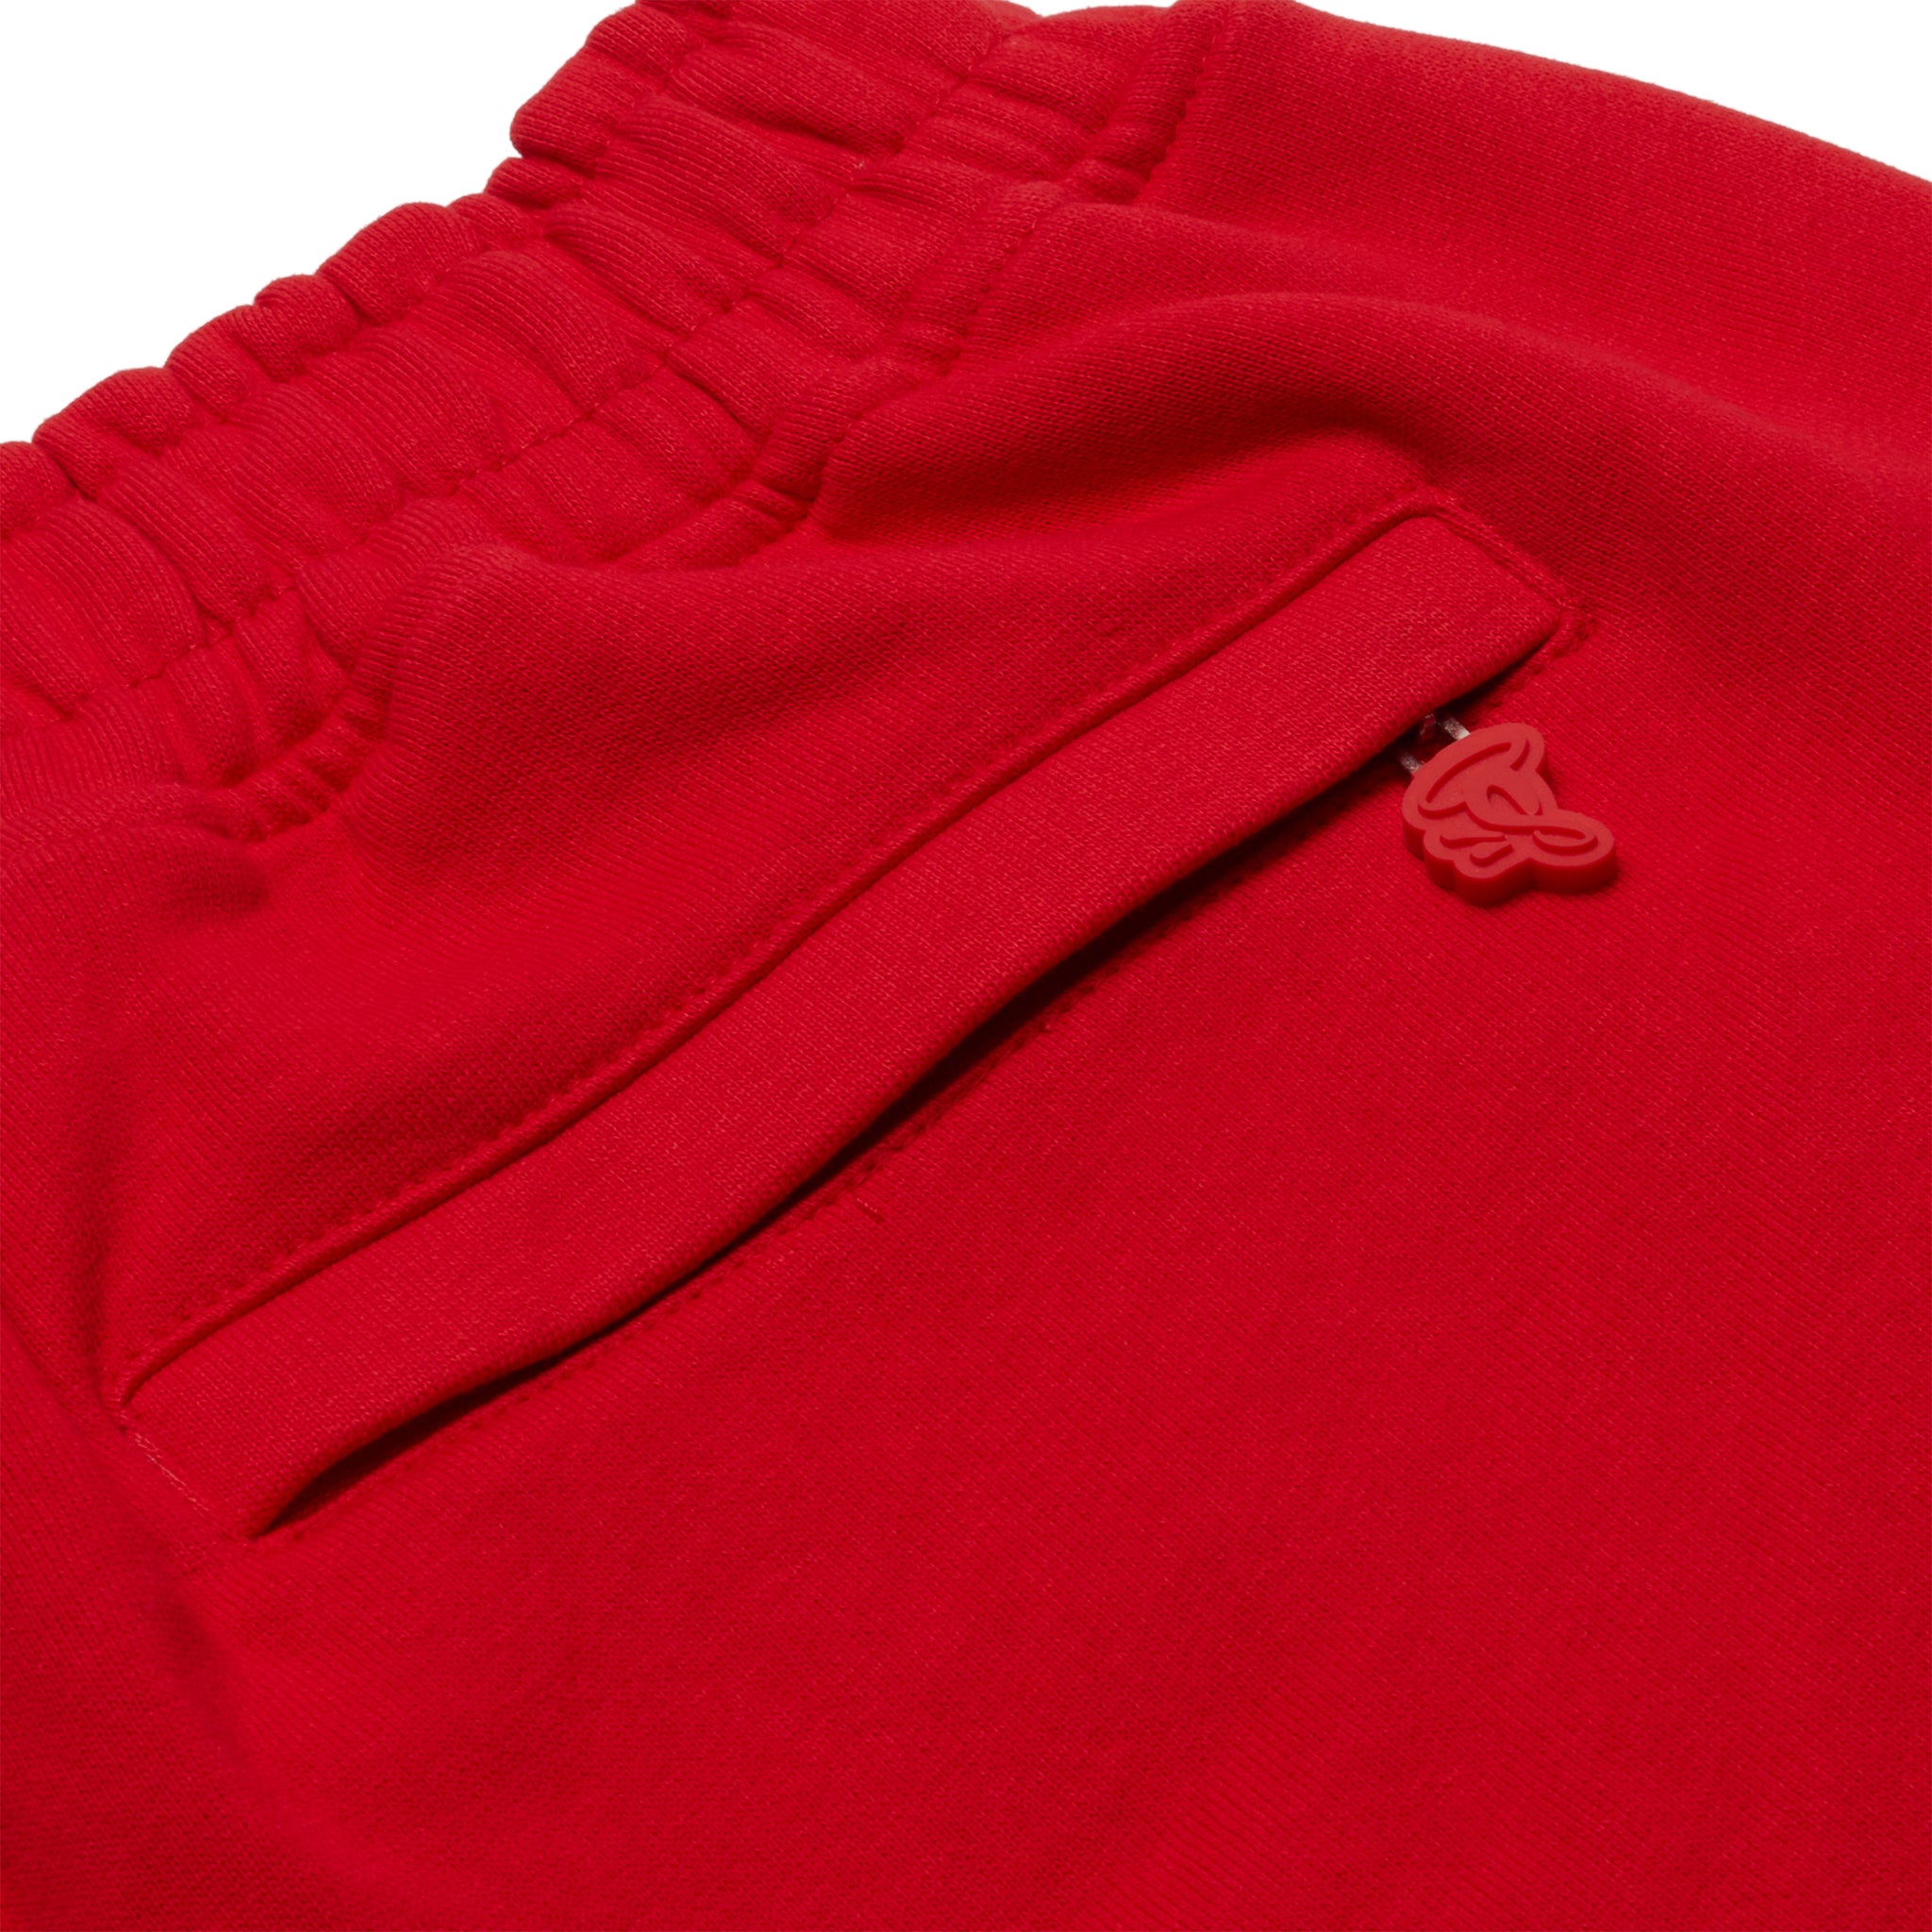 Back pocket view of Syna World Team Syna Twinset Red T-Shirt & Shorts